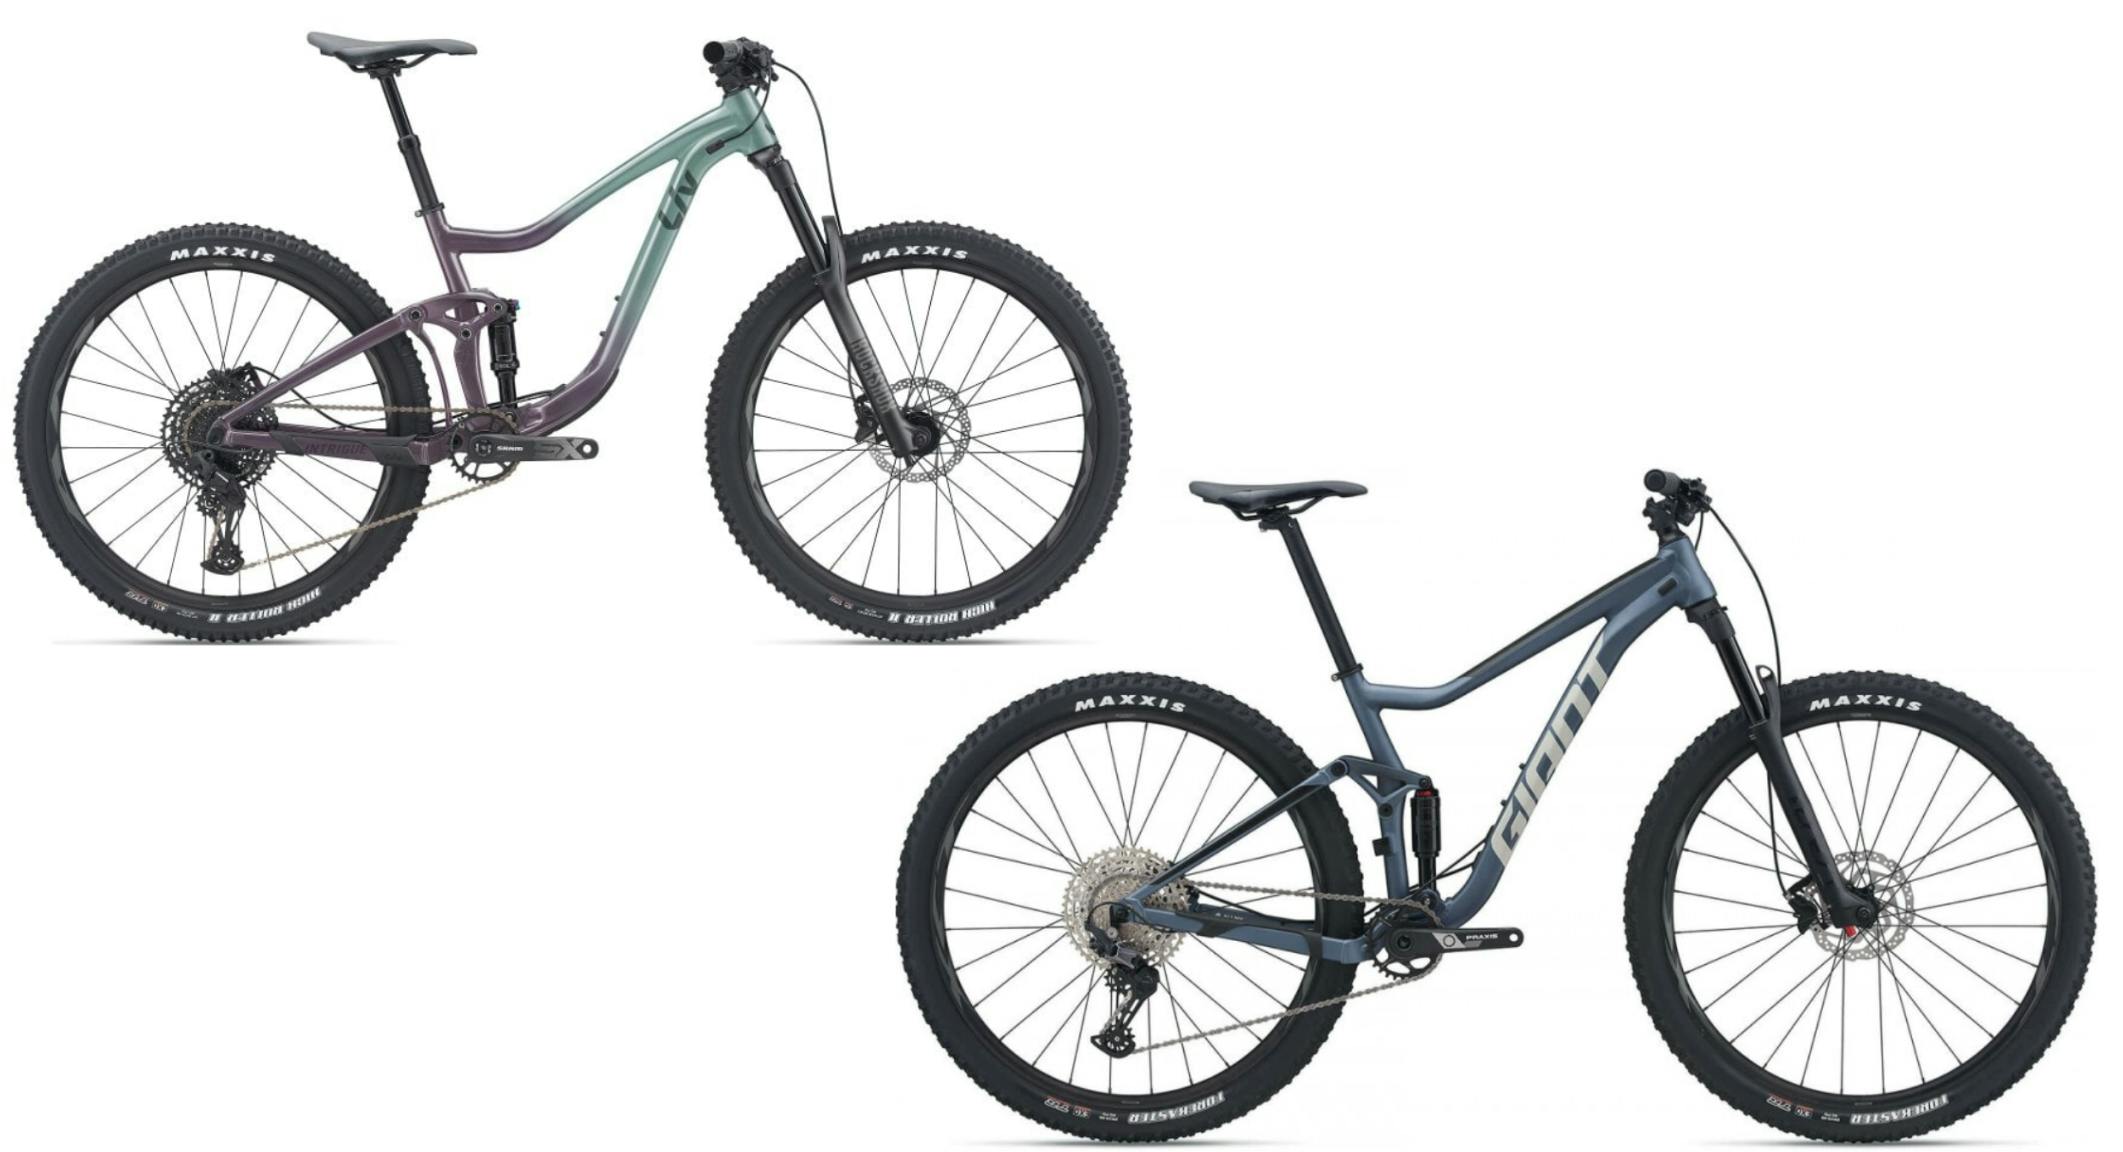 Two bikes. The Liv Intrigue 29 1 Mountain Bike (top left) and the Giant Stance 29 2 Mountain Bike (bottom right).